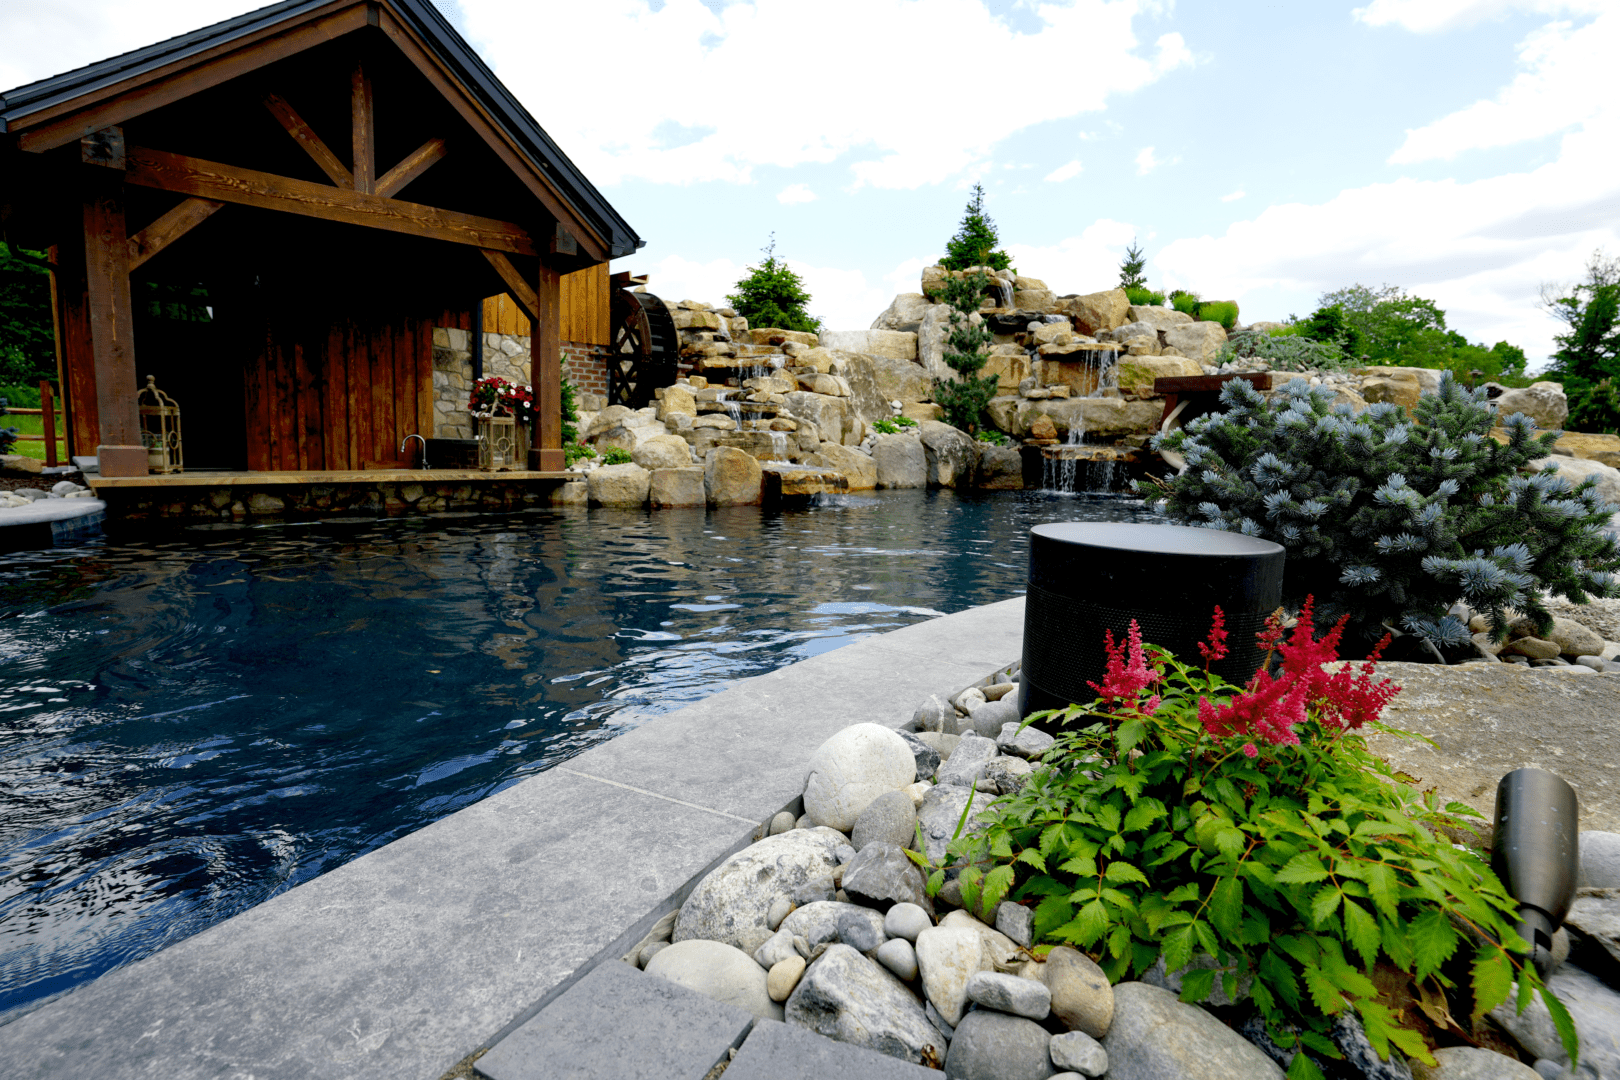 A swimming pool in a backyard, enhanced with outdoor lighting and audio features.